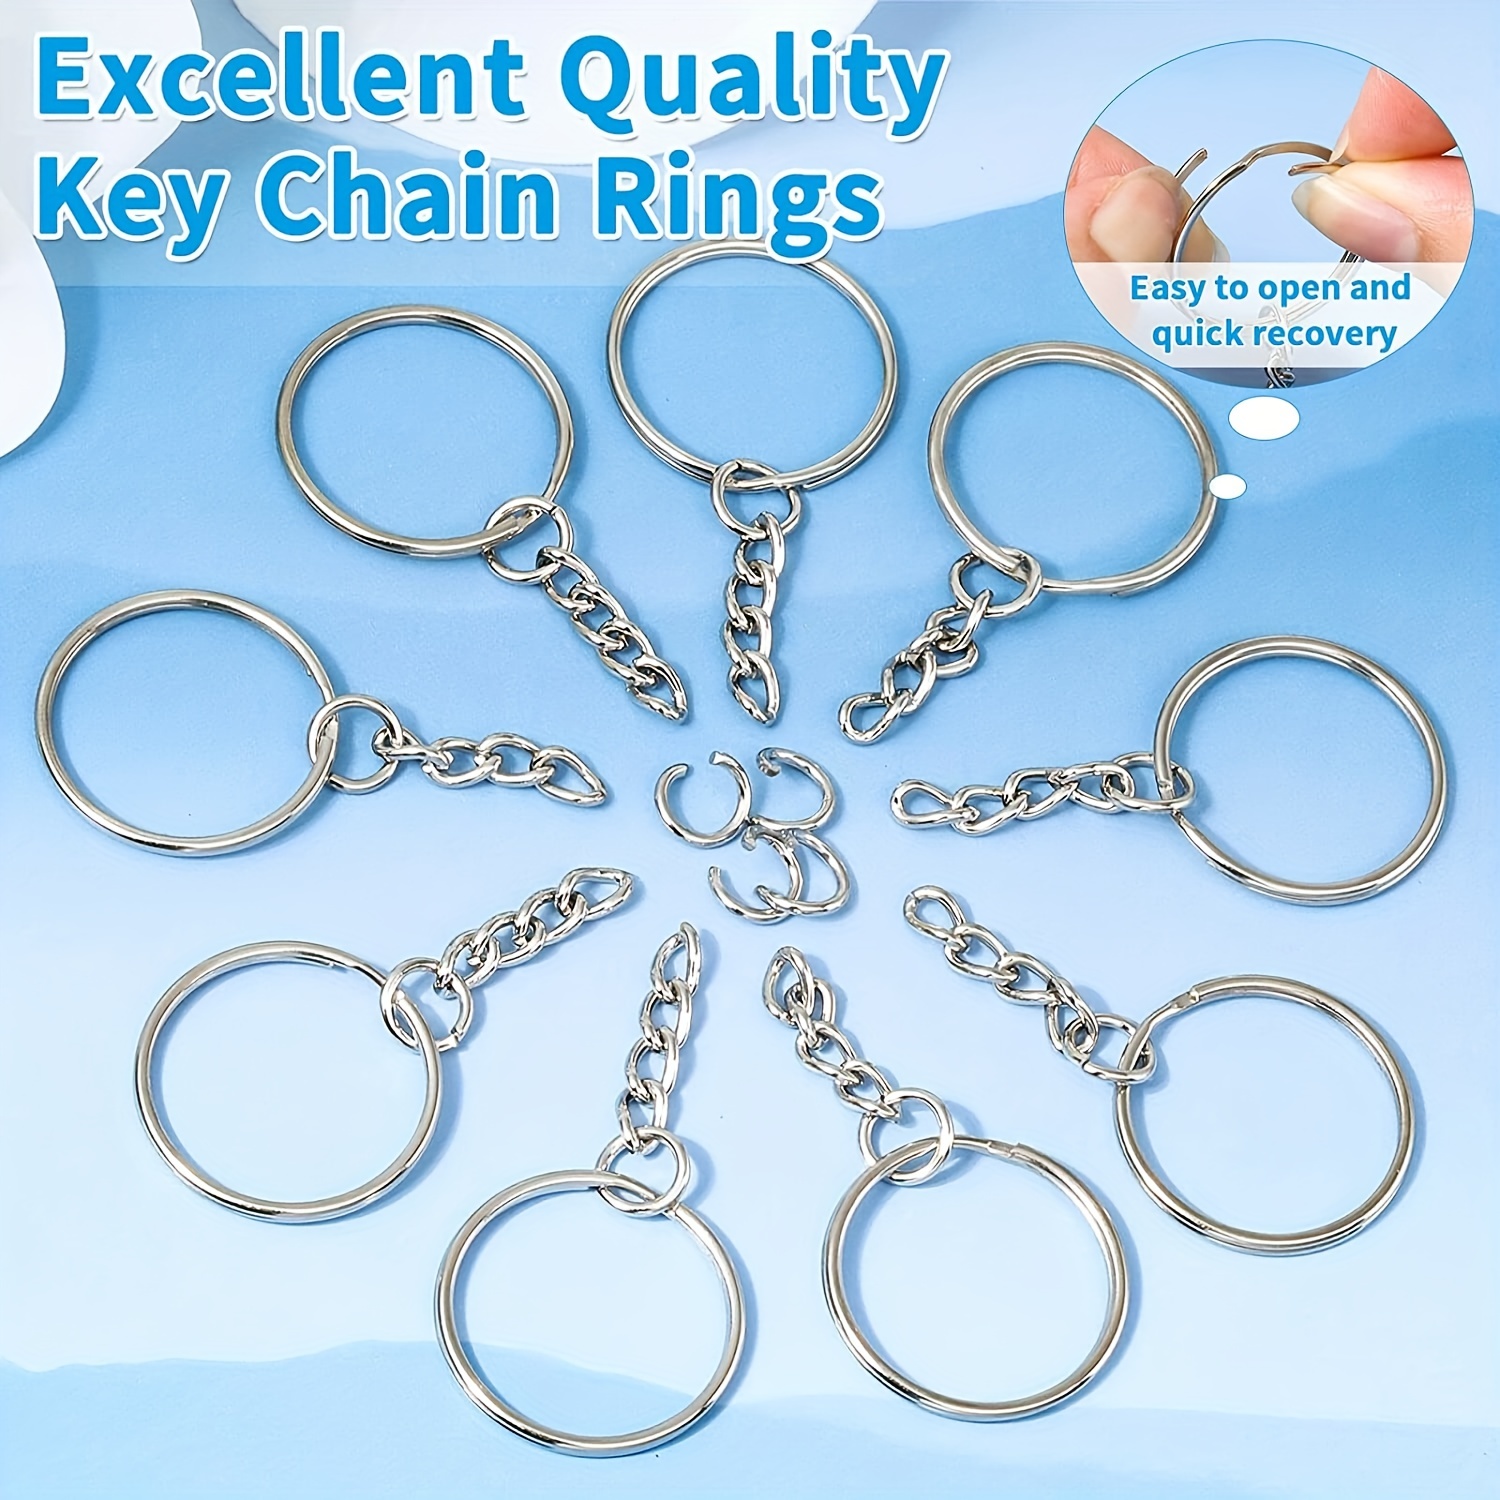 Keychain Making Supplies 50pcs Keychains With Chain And 50 Pcs Jump Rings  Keychain Rings Kit Keychain Findings Bulk For Keychain Making Diy Crafts